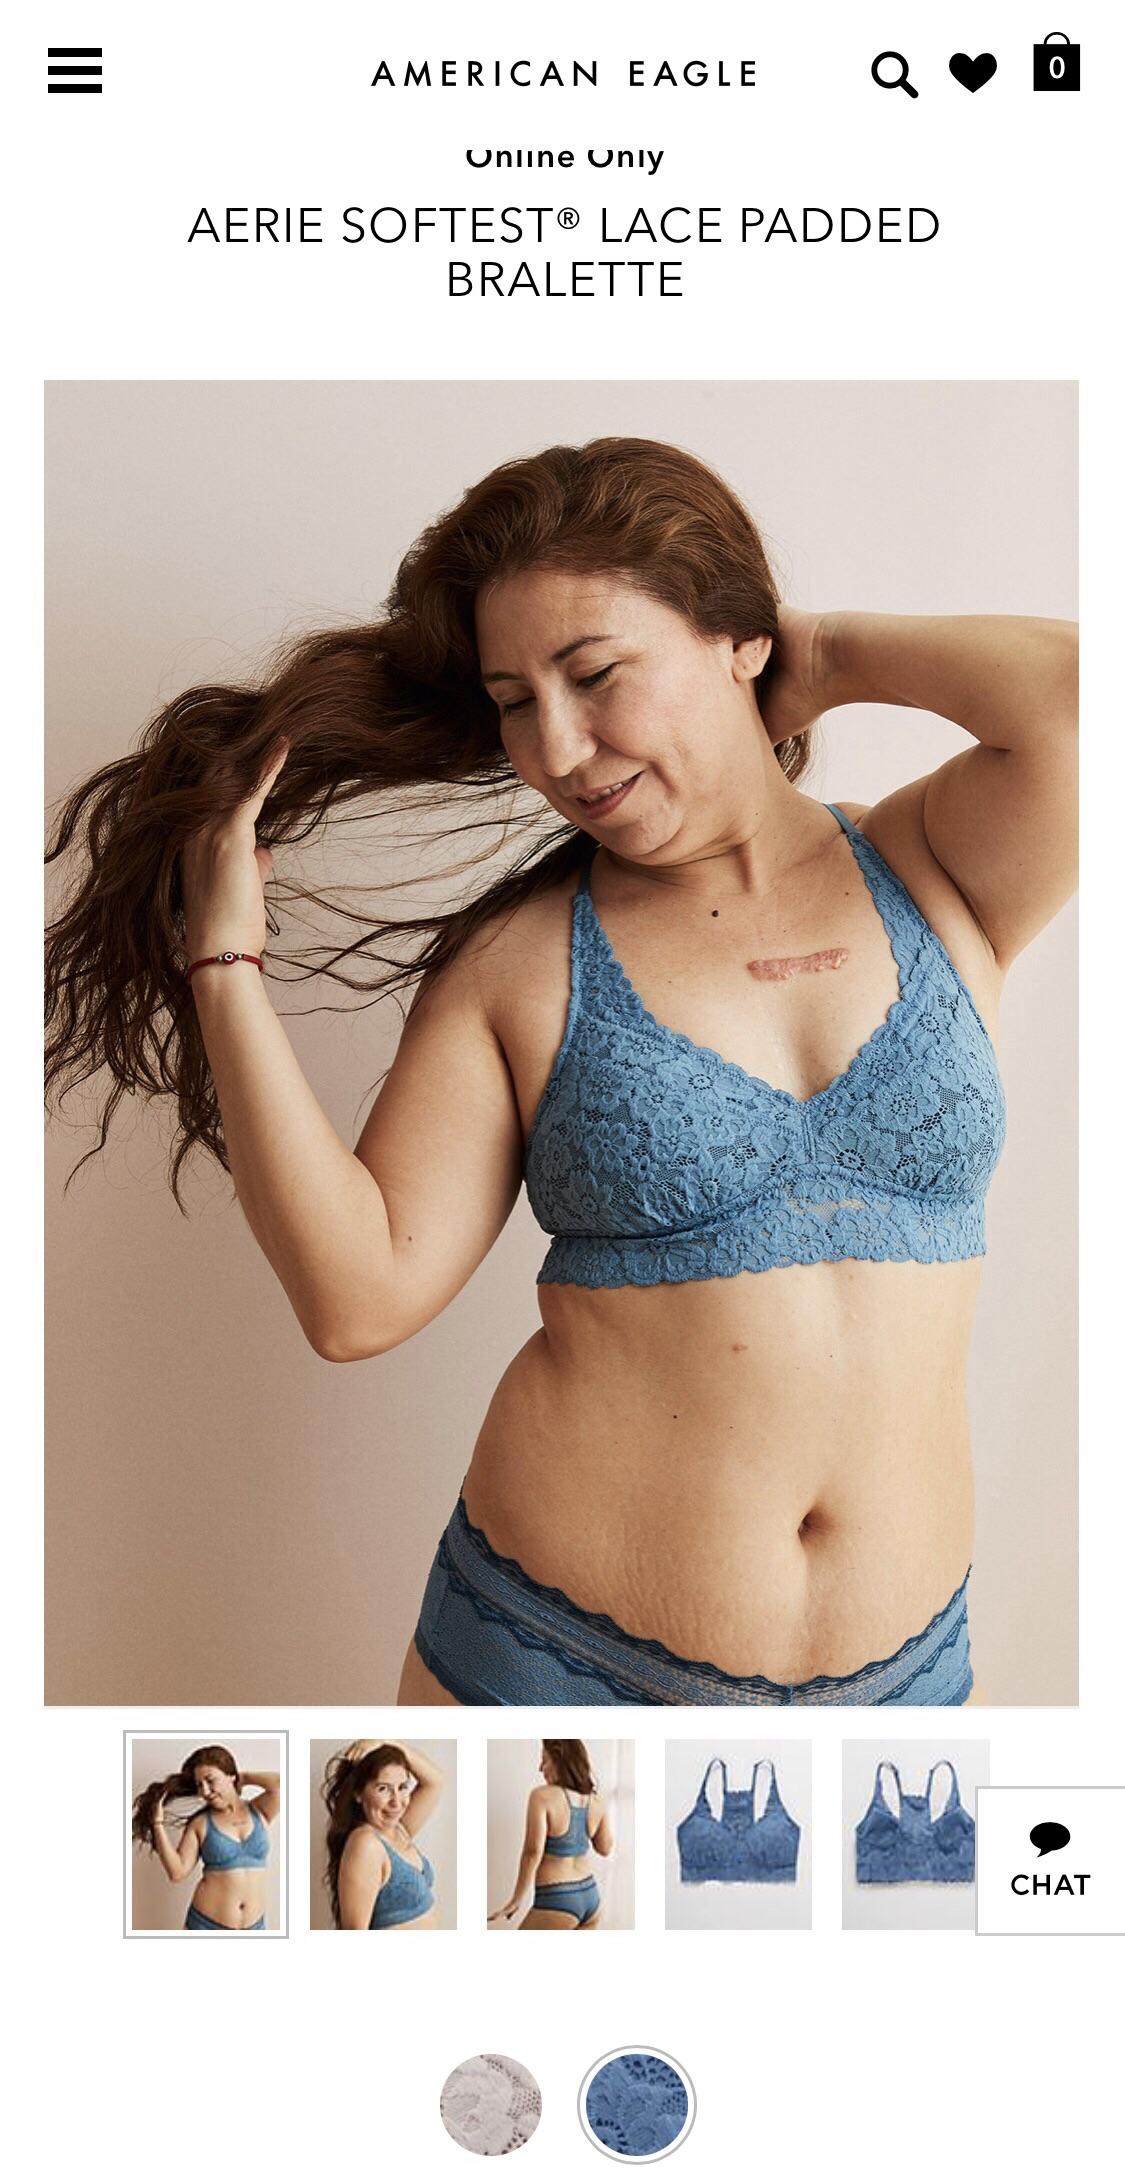 American Eagle has started using unretouched women to model their clothing and underwear to promote body positivity.